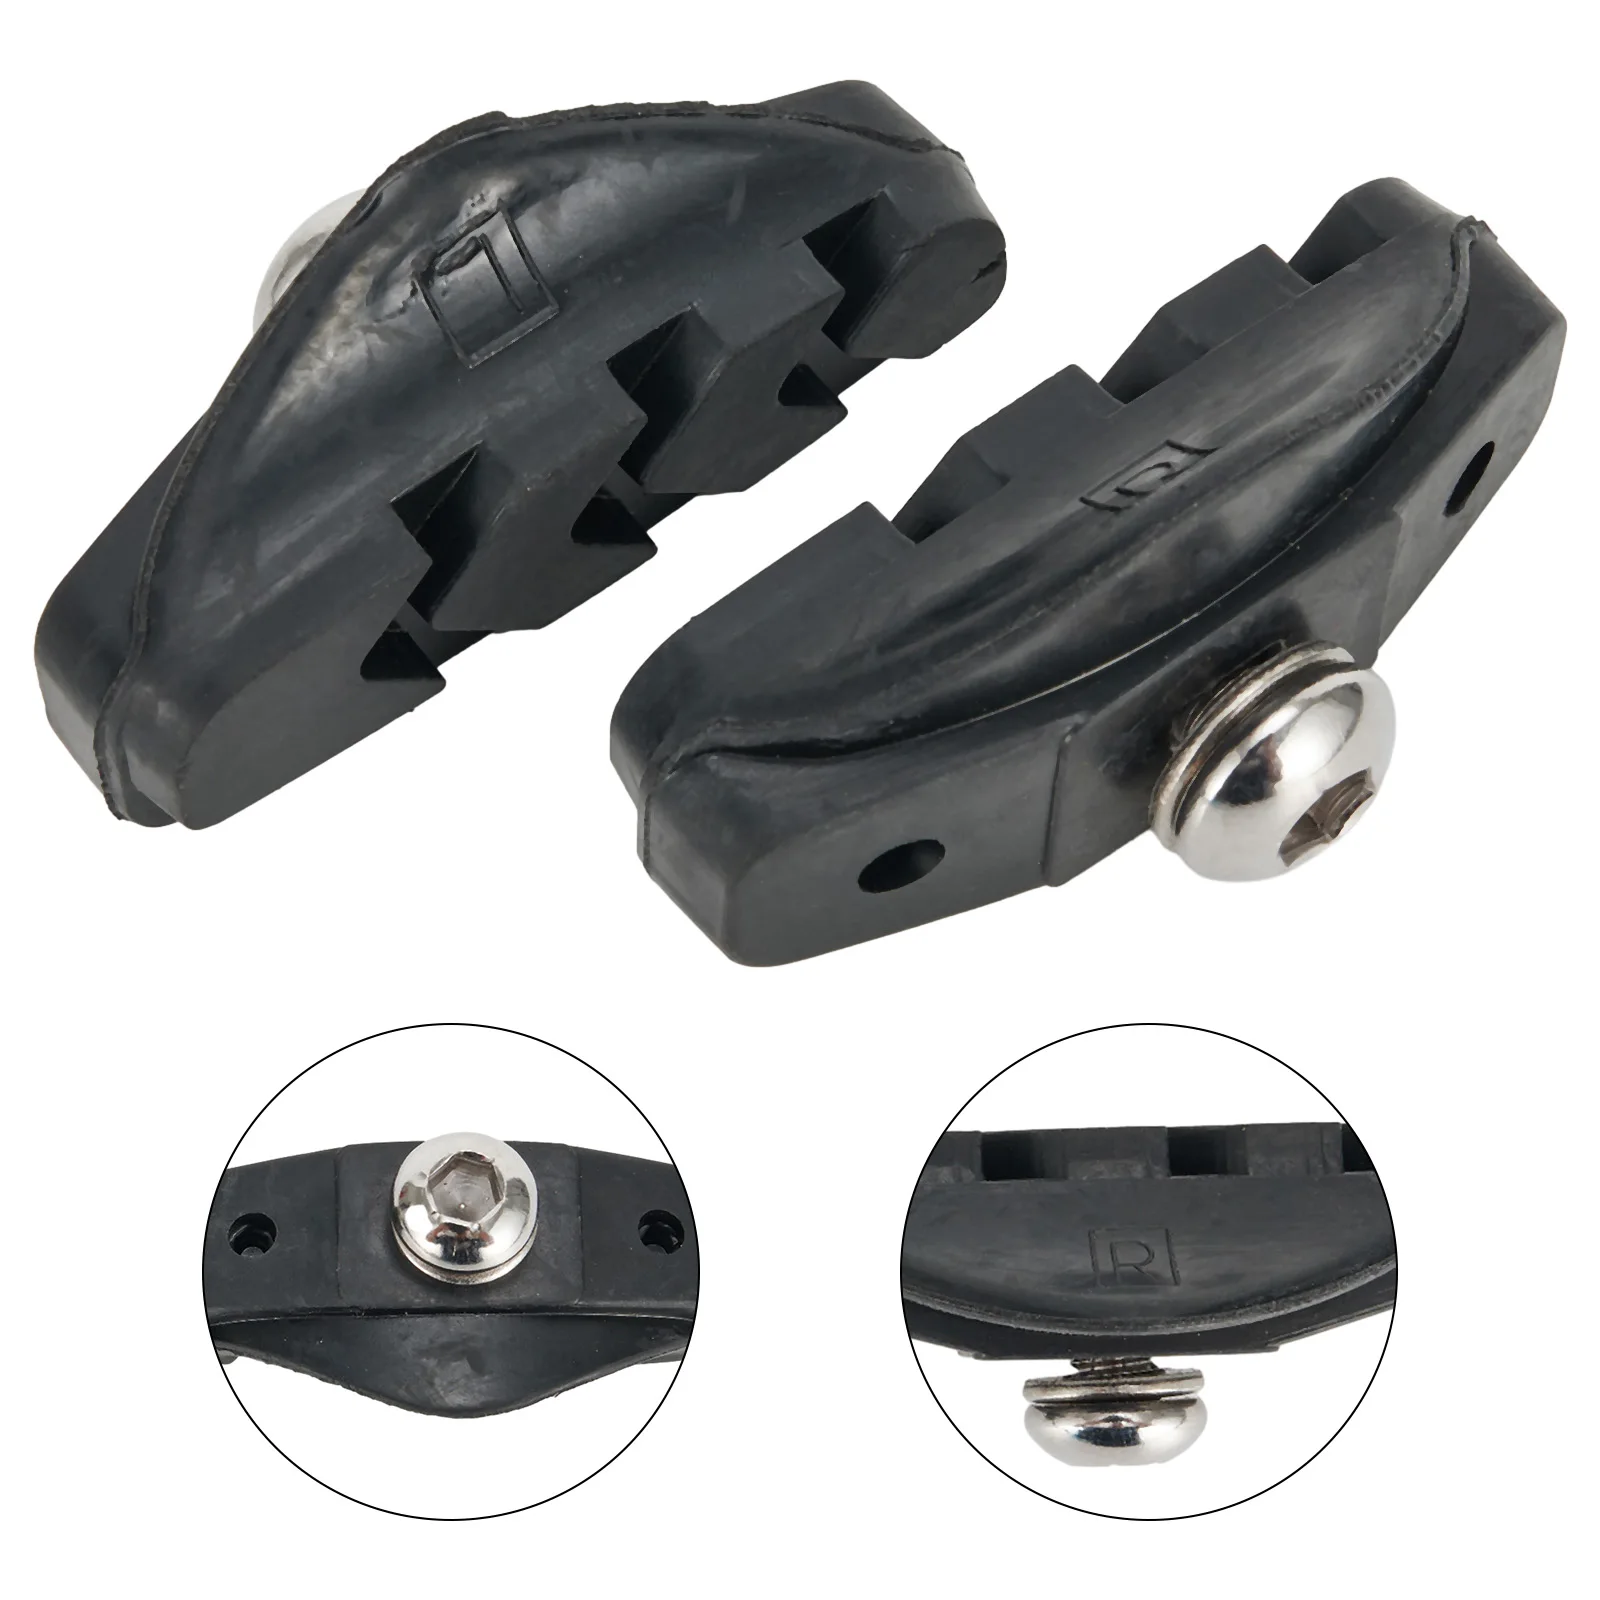 

Bike C Brake Pads Parts Cycling Mountain Bike Silent Soft Rubber 1 Pair C Brake Pad C Clip Clamp Cycle Durable